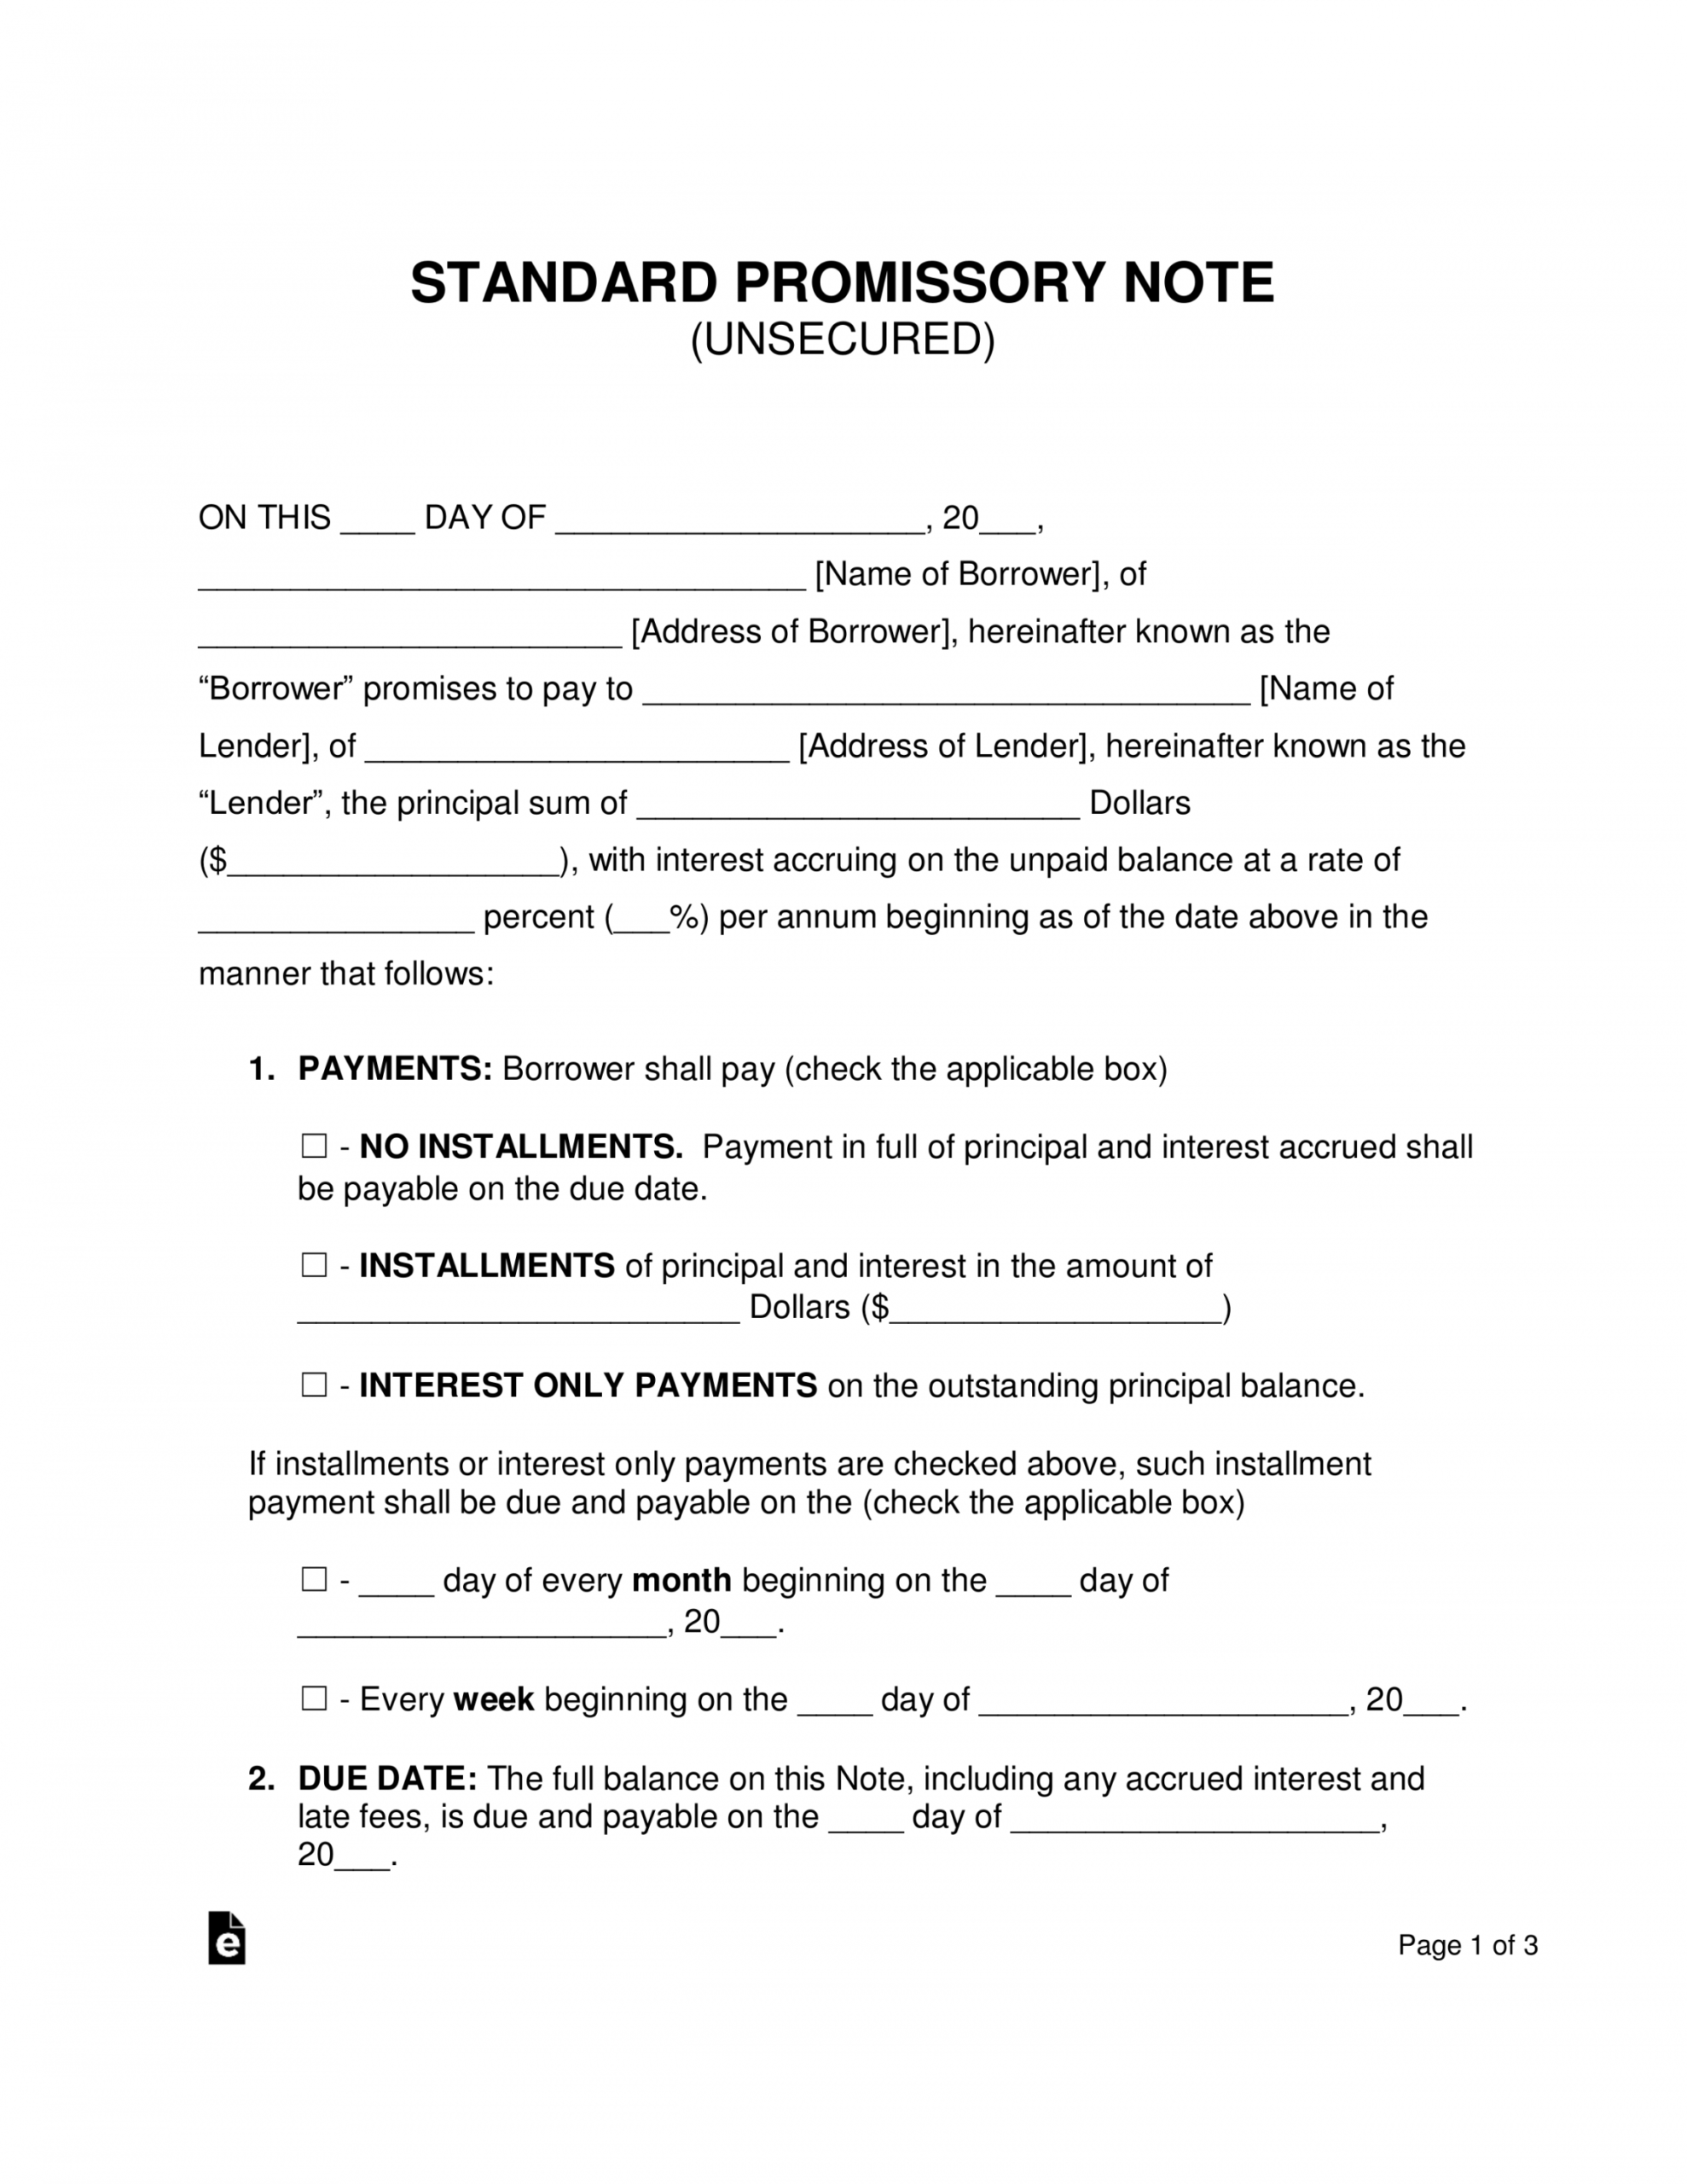 printable free unsecured promissory note template  word  pdf unsecured promissory note template excel